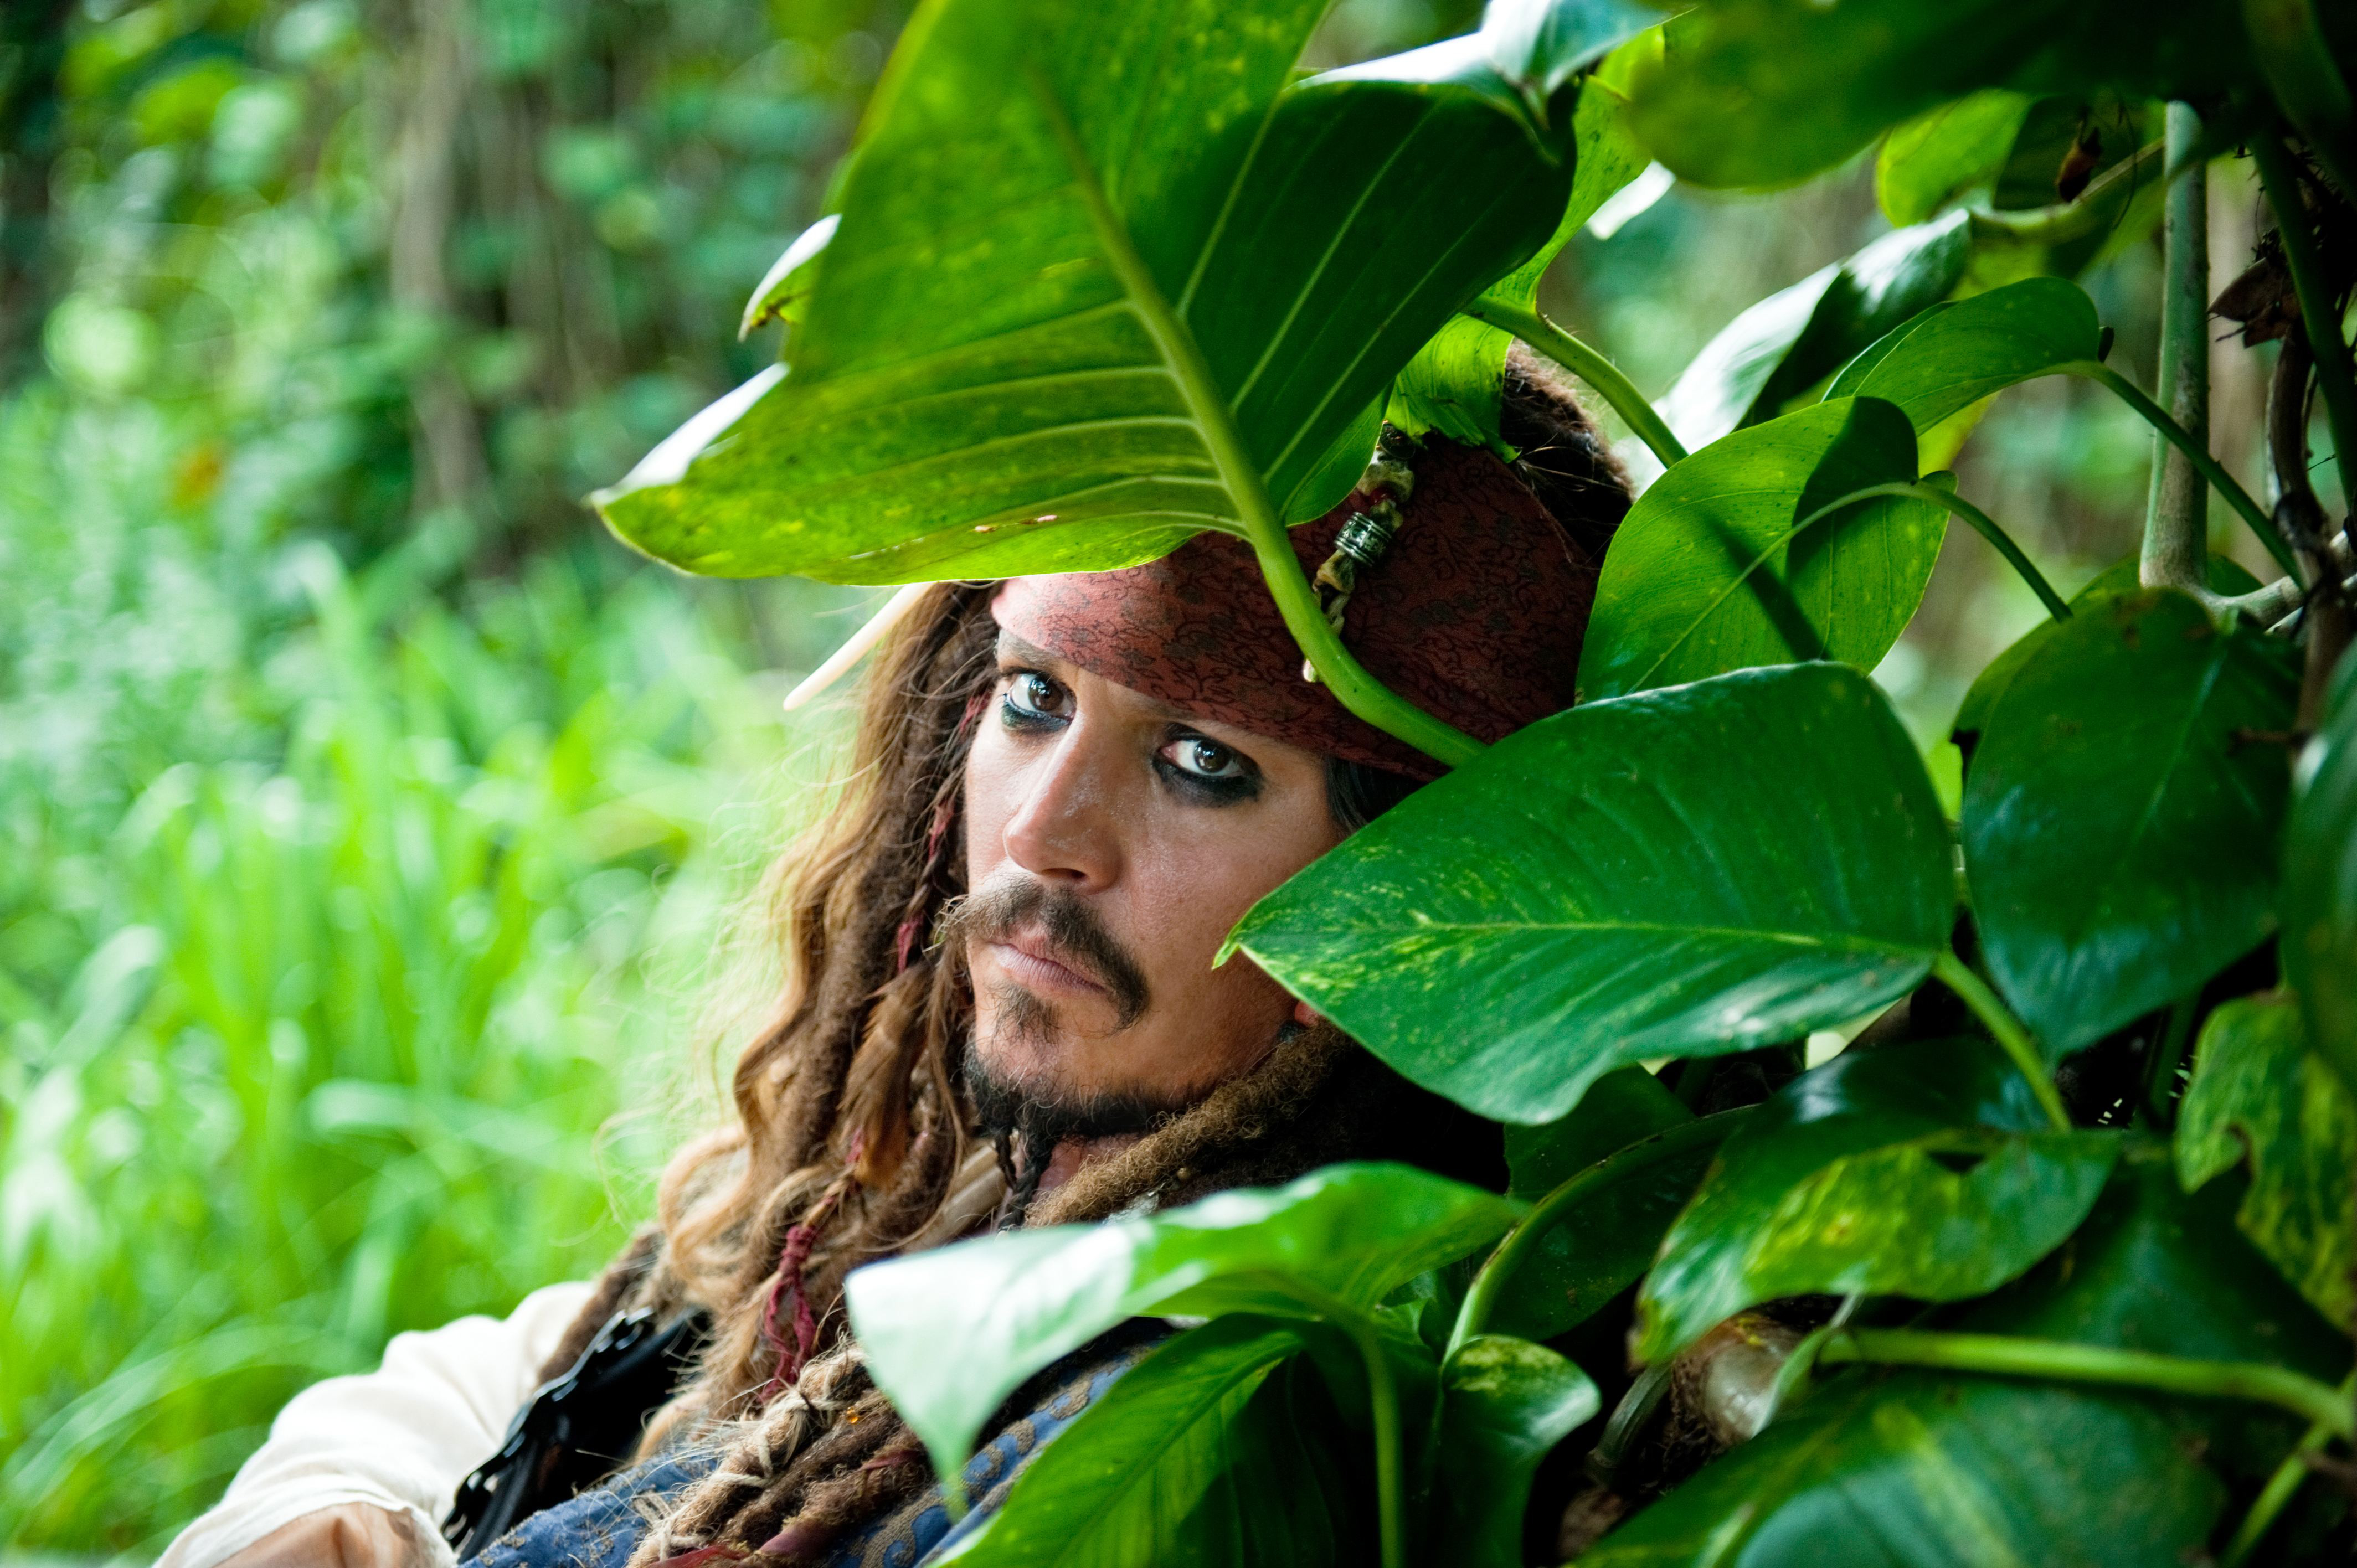 jack sparrow, johnny depp, pirates of the caribbean, movie, pirates of the caribbean: on stranger tides, pirate